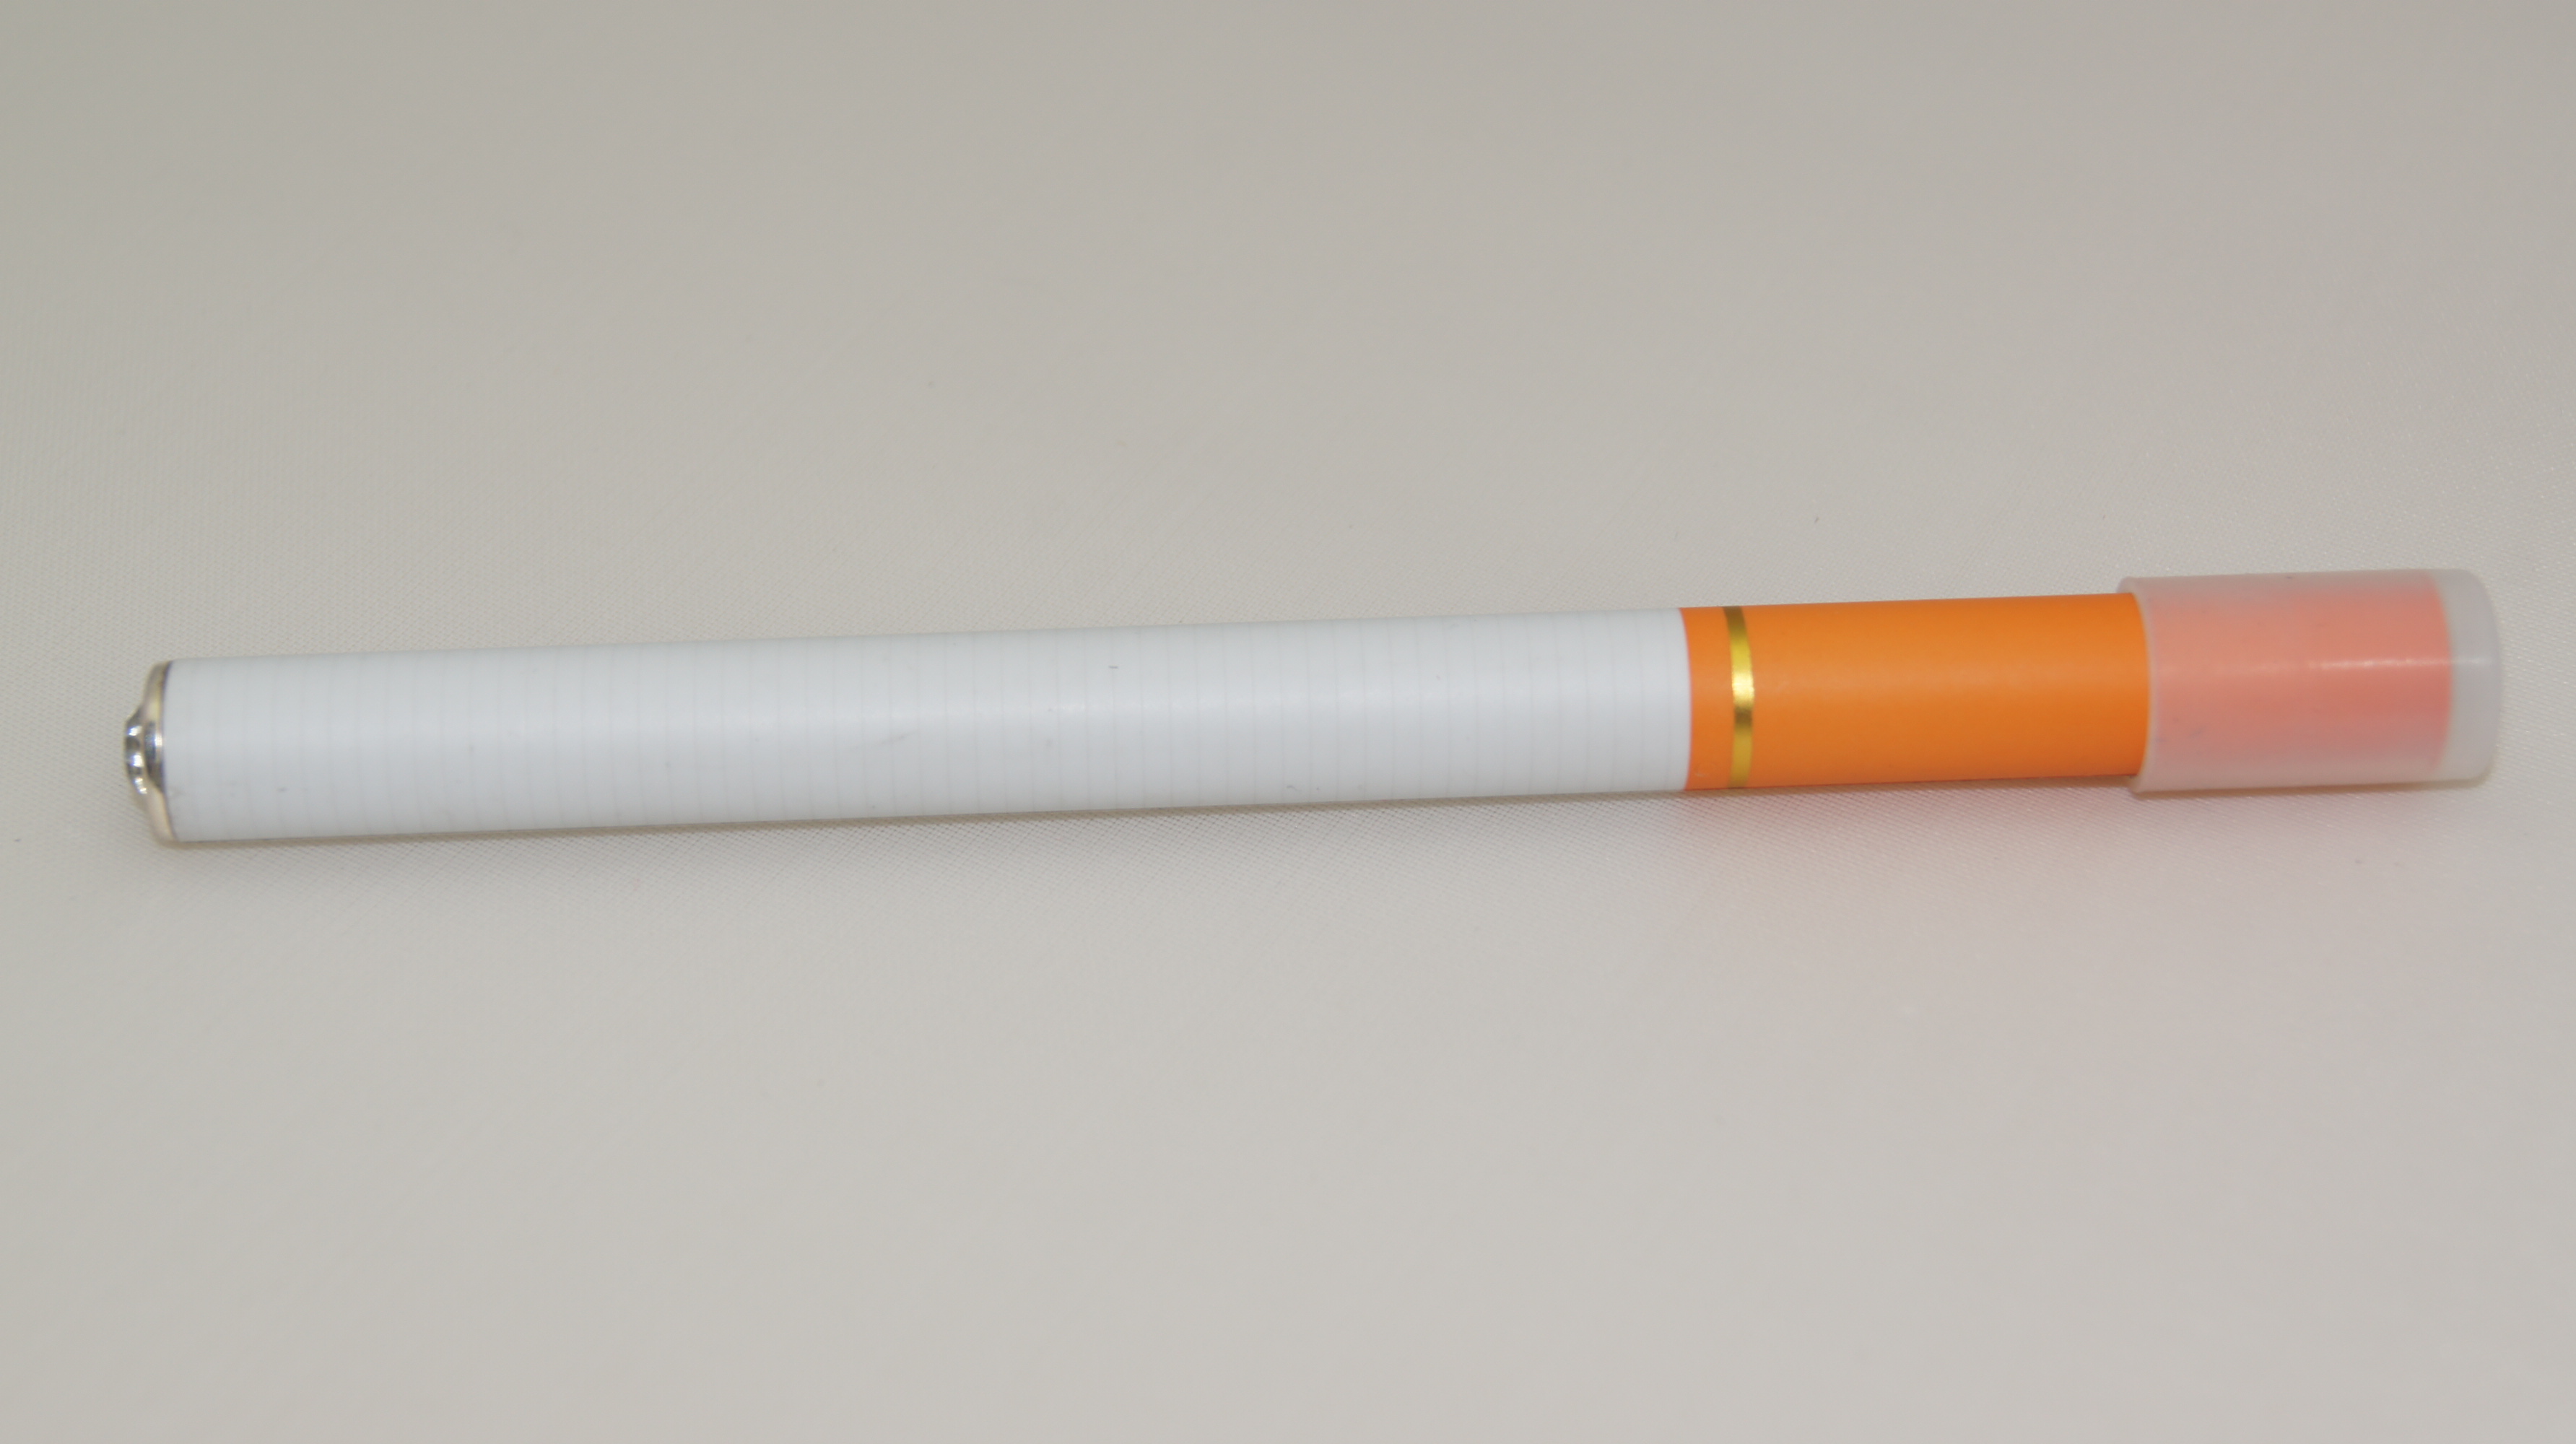 The disposable electronic cigarette